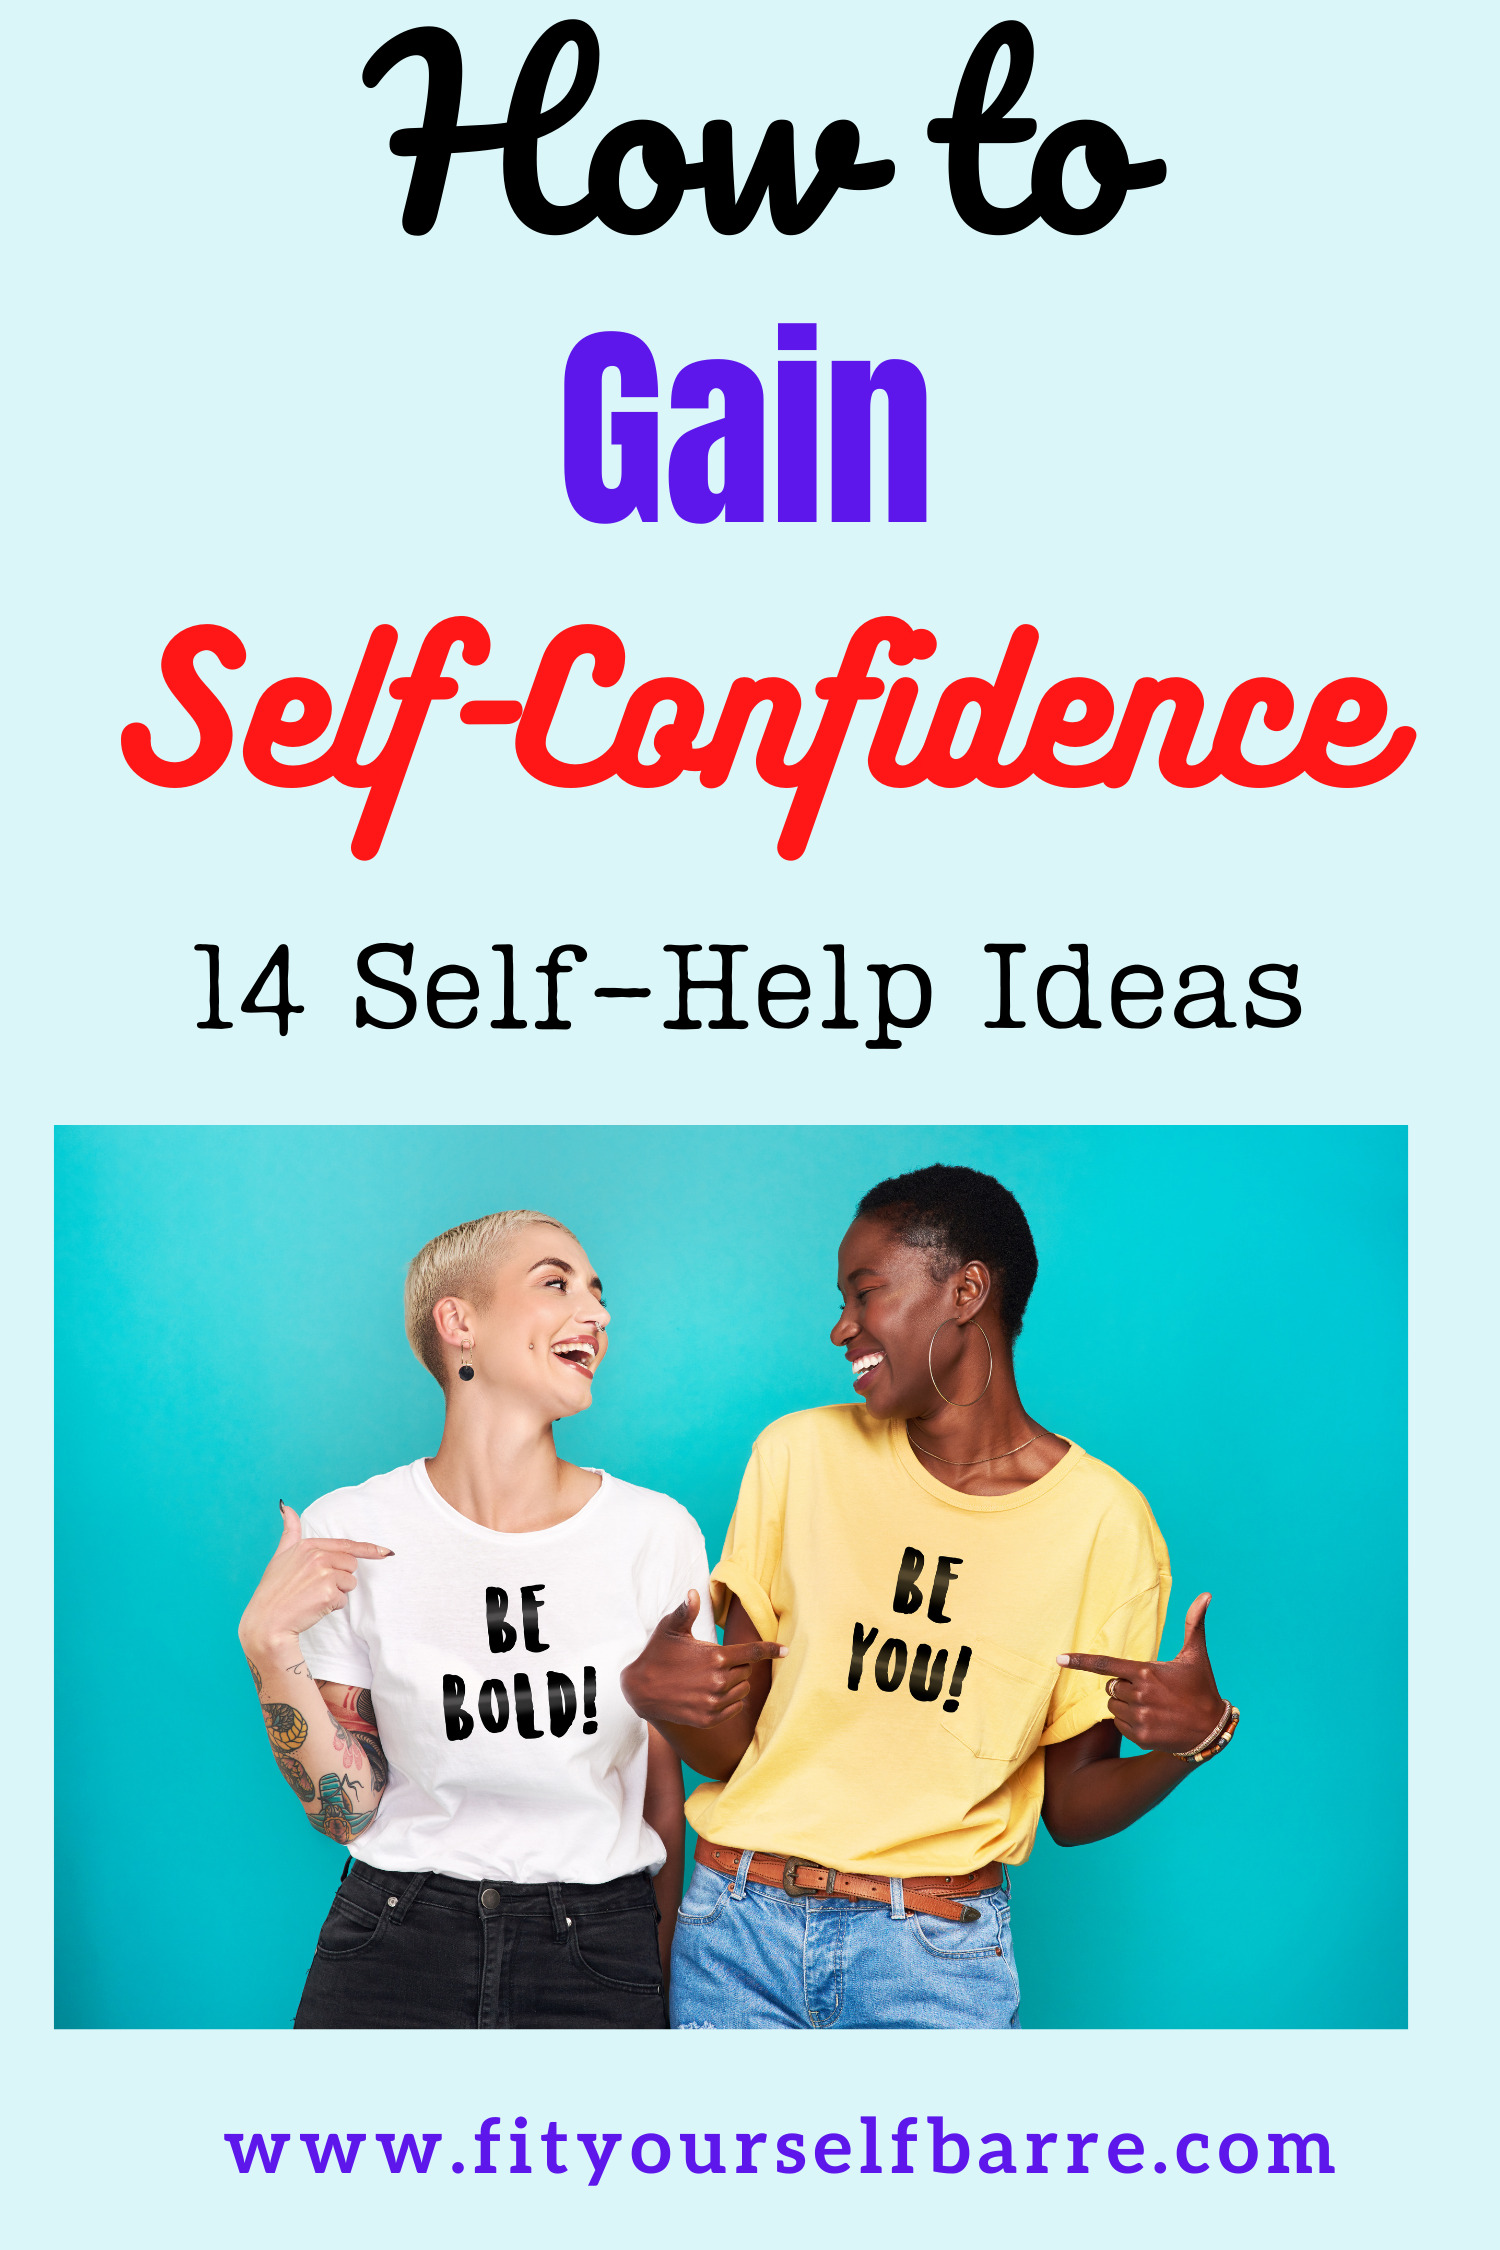 Gaining-self-confidence-2-beautiful-confident-women-showing-their-bold-tshirts-statements